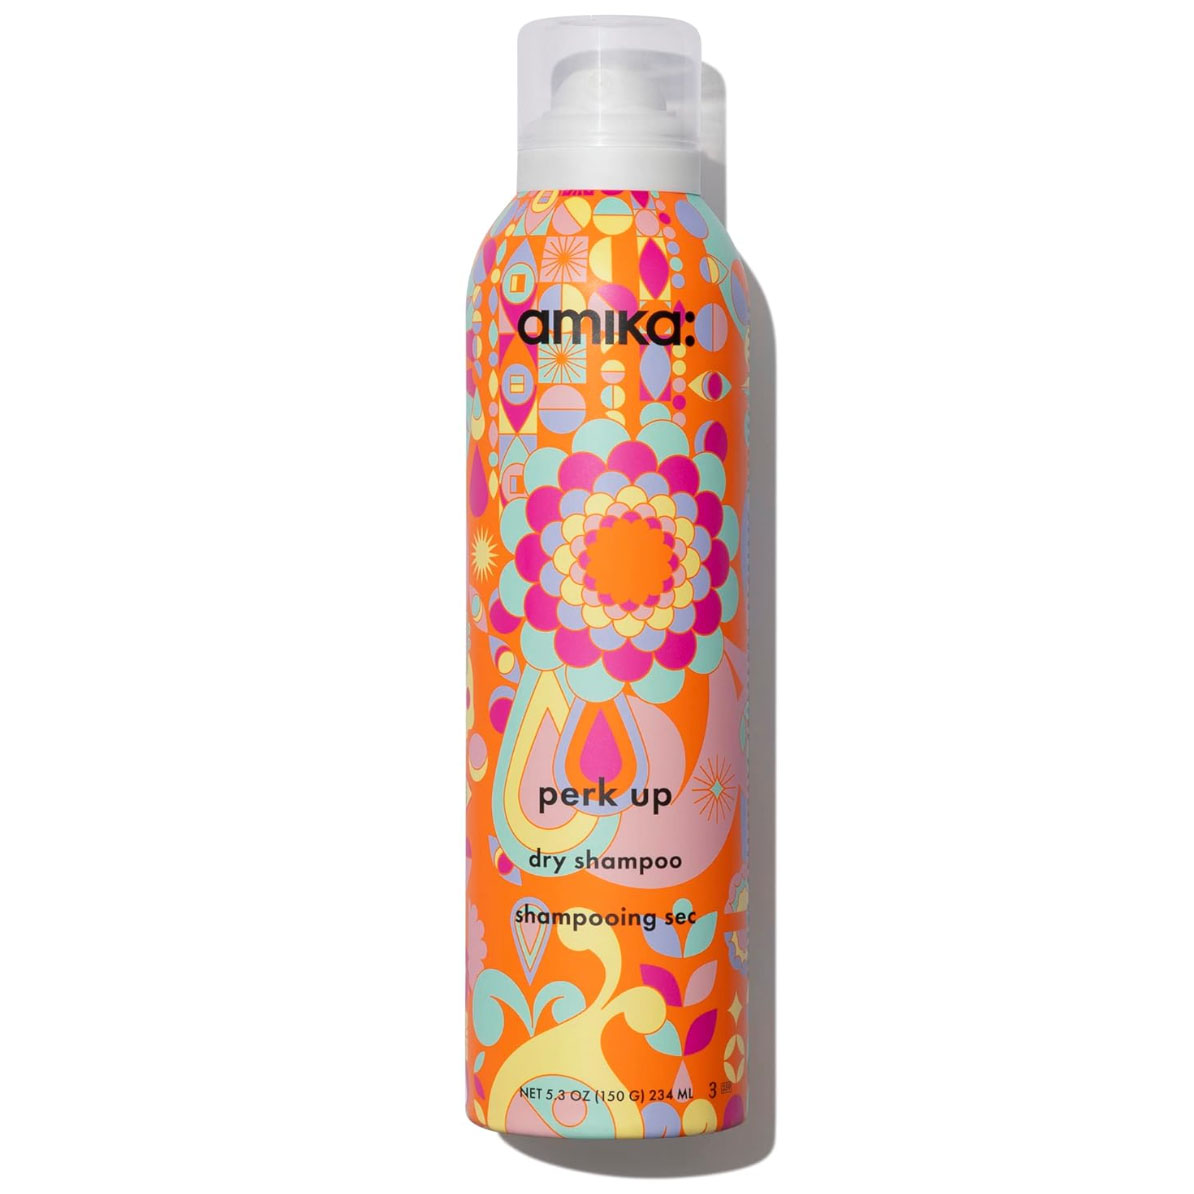 amika perk up talc-free dry shampoo in colorful bottle